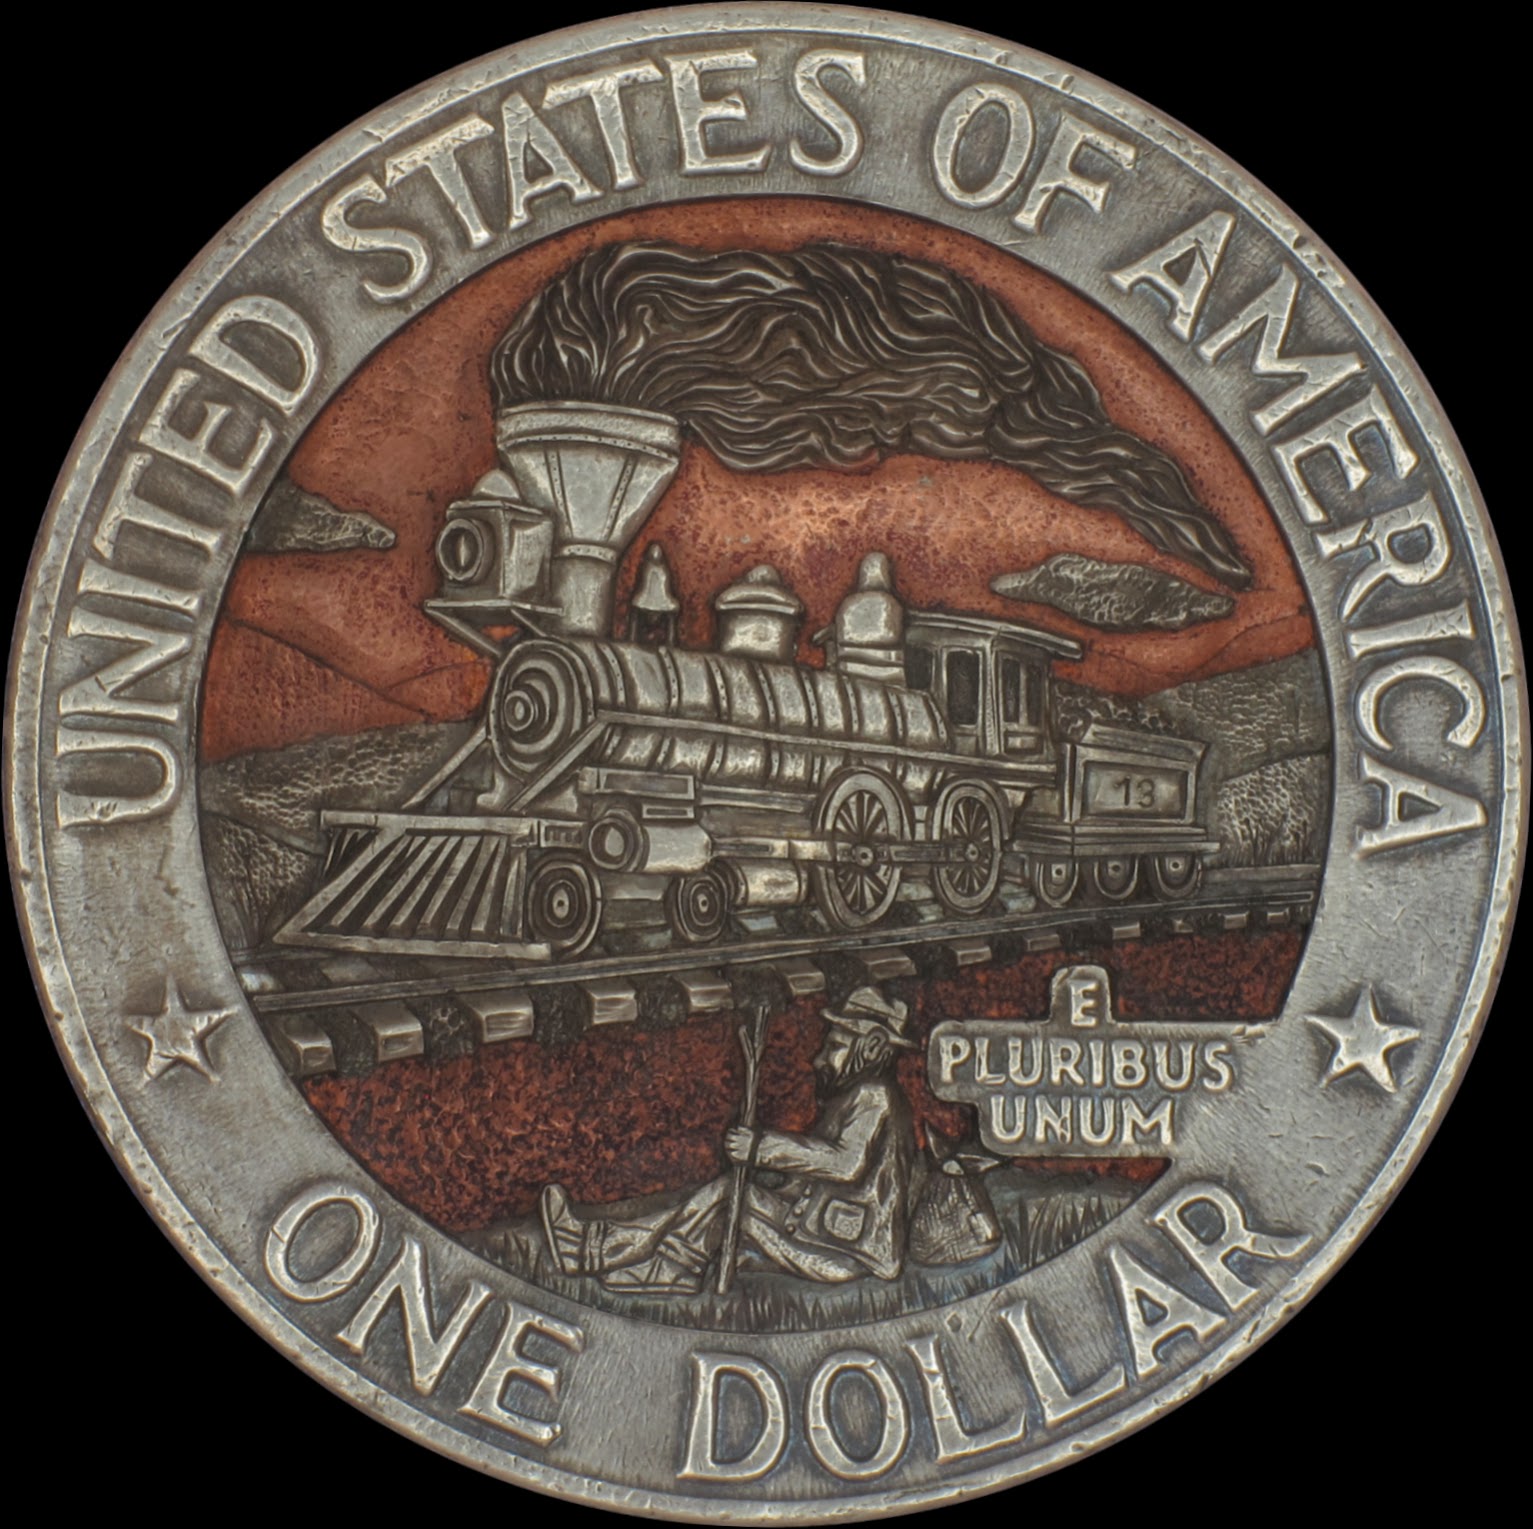 15-Train-Paolo-Curio-aka-MrThe-Hobo-Nickels-Skull-Coins-&-Other-Sculptures-www-designstack-co